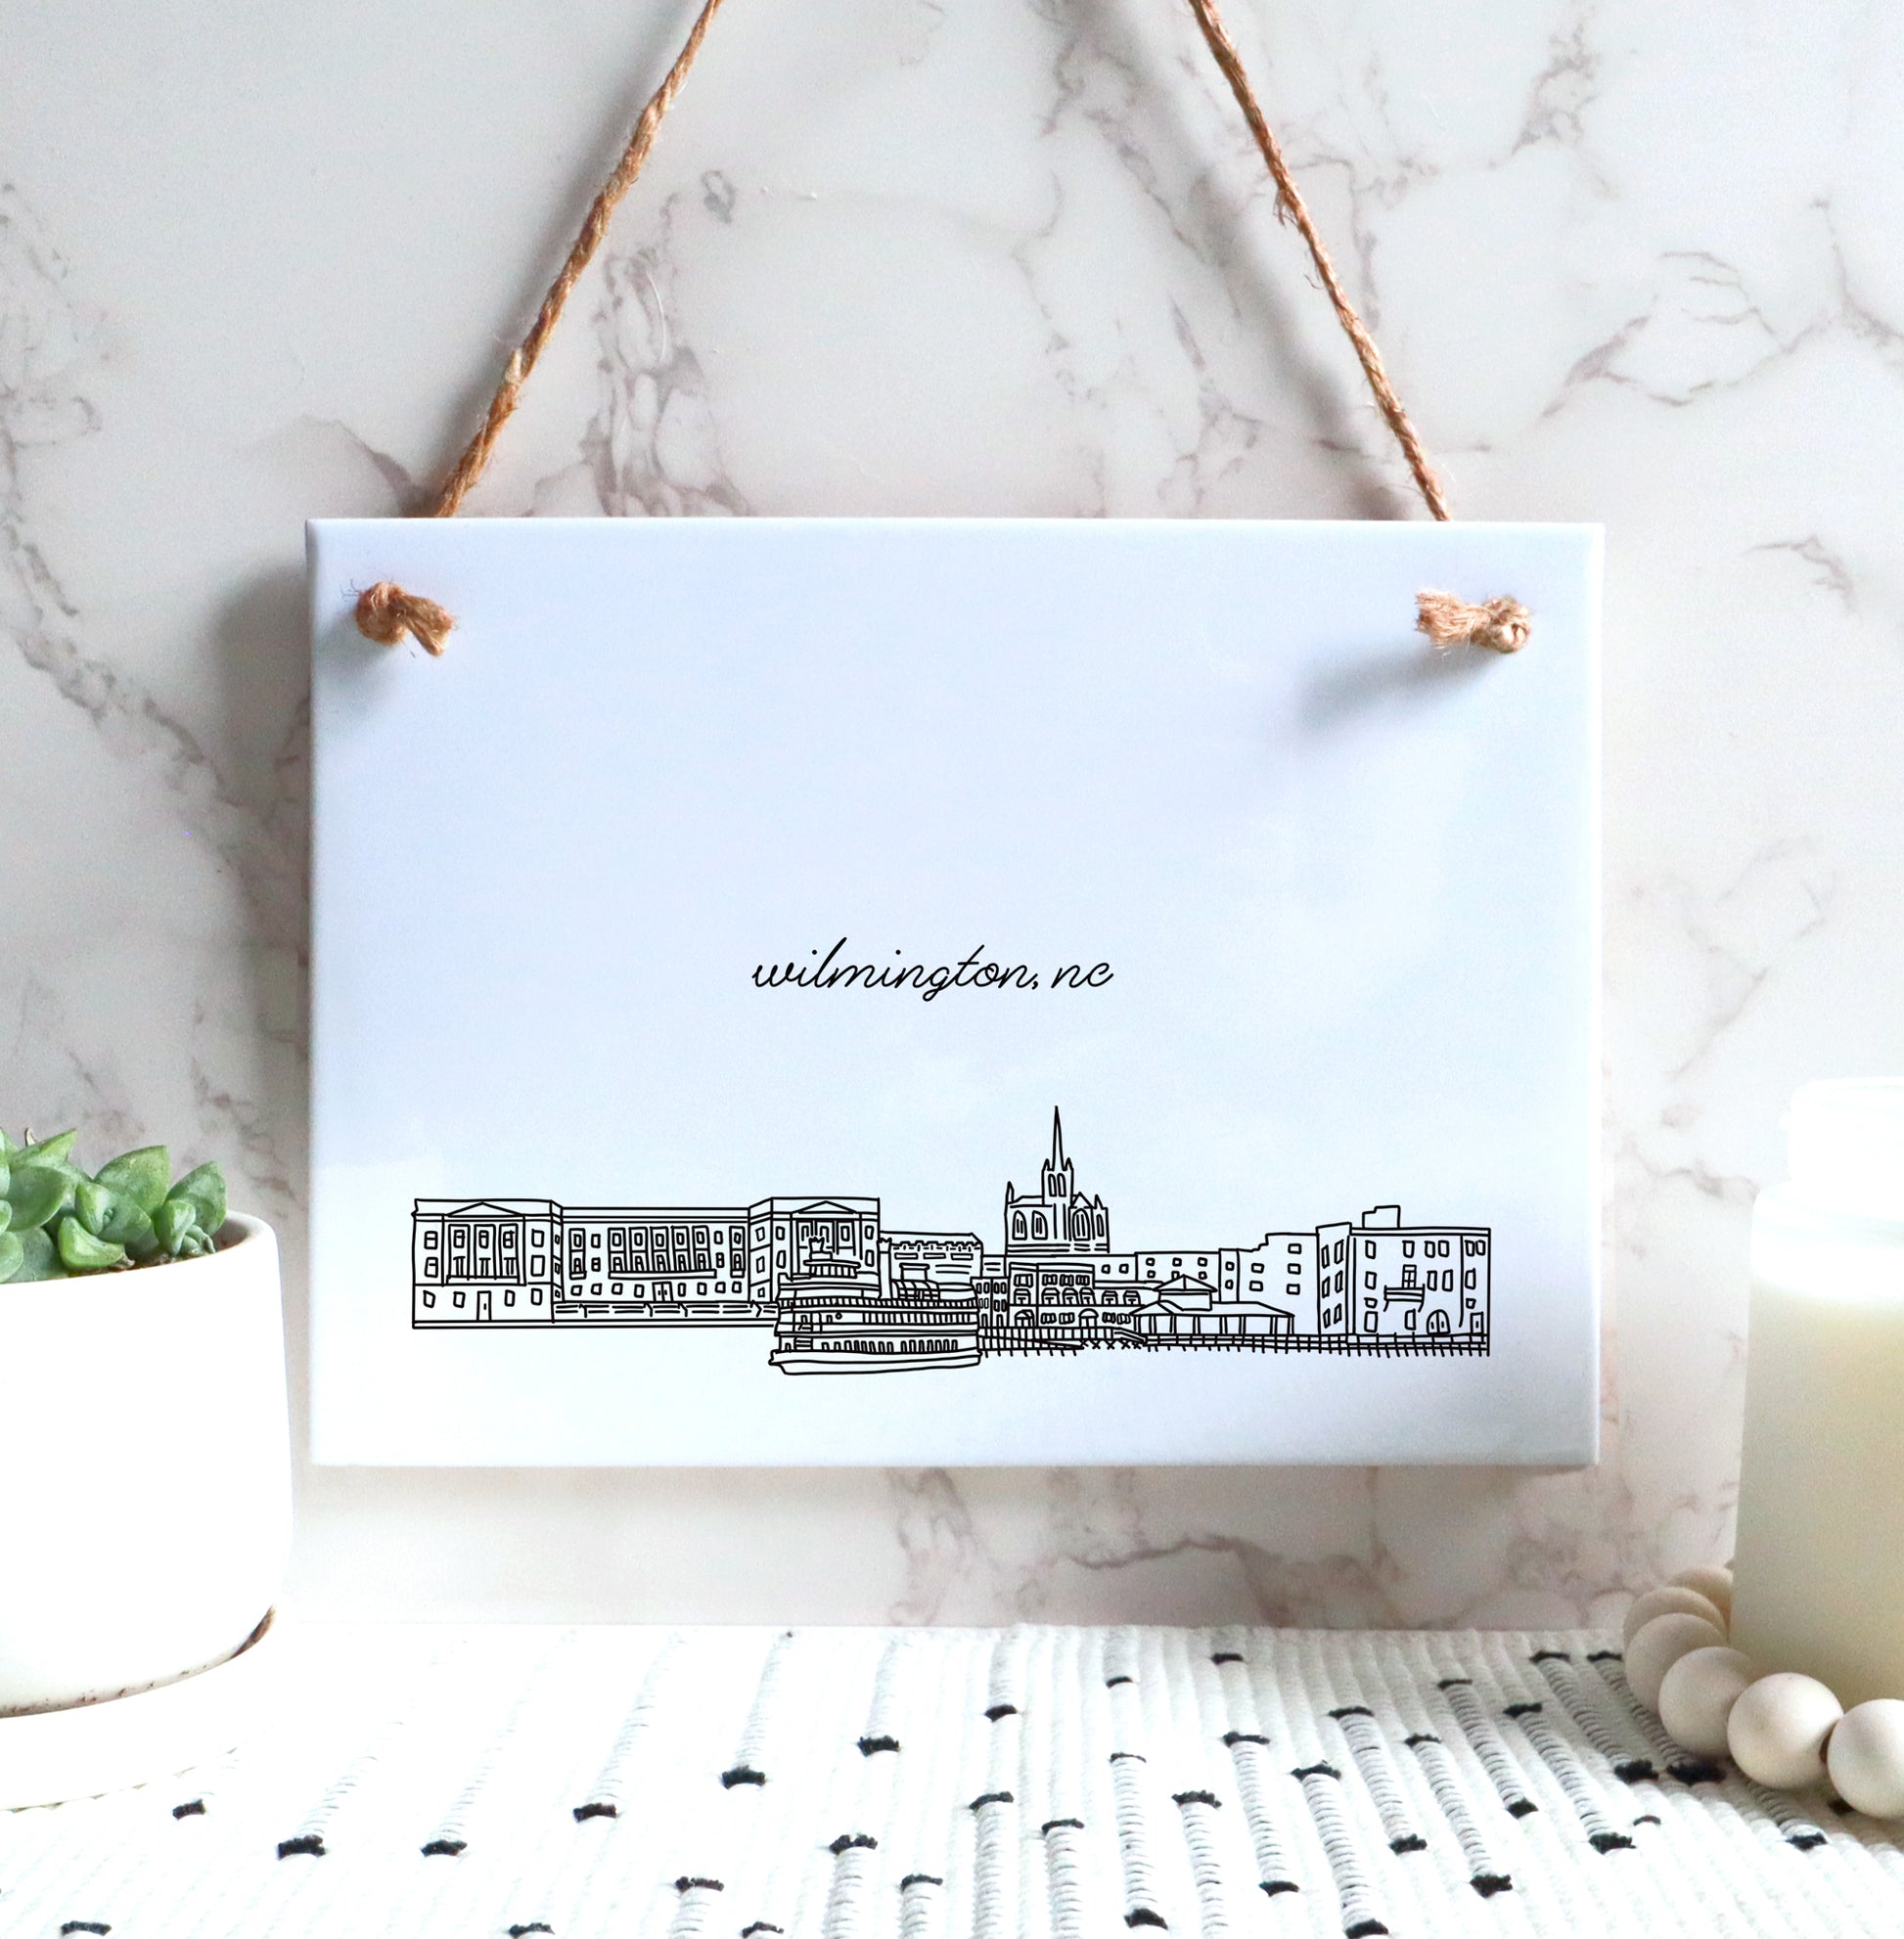 A Wilmington NC souvenir of a drawing of the city skyline on a rectangle tile sign, in the color black and white